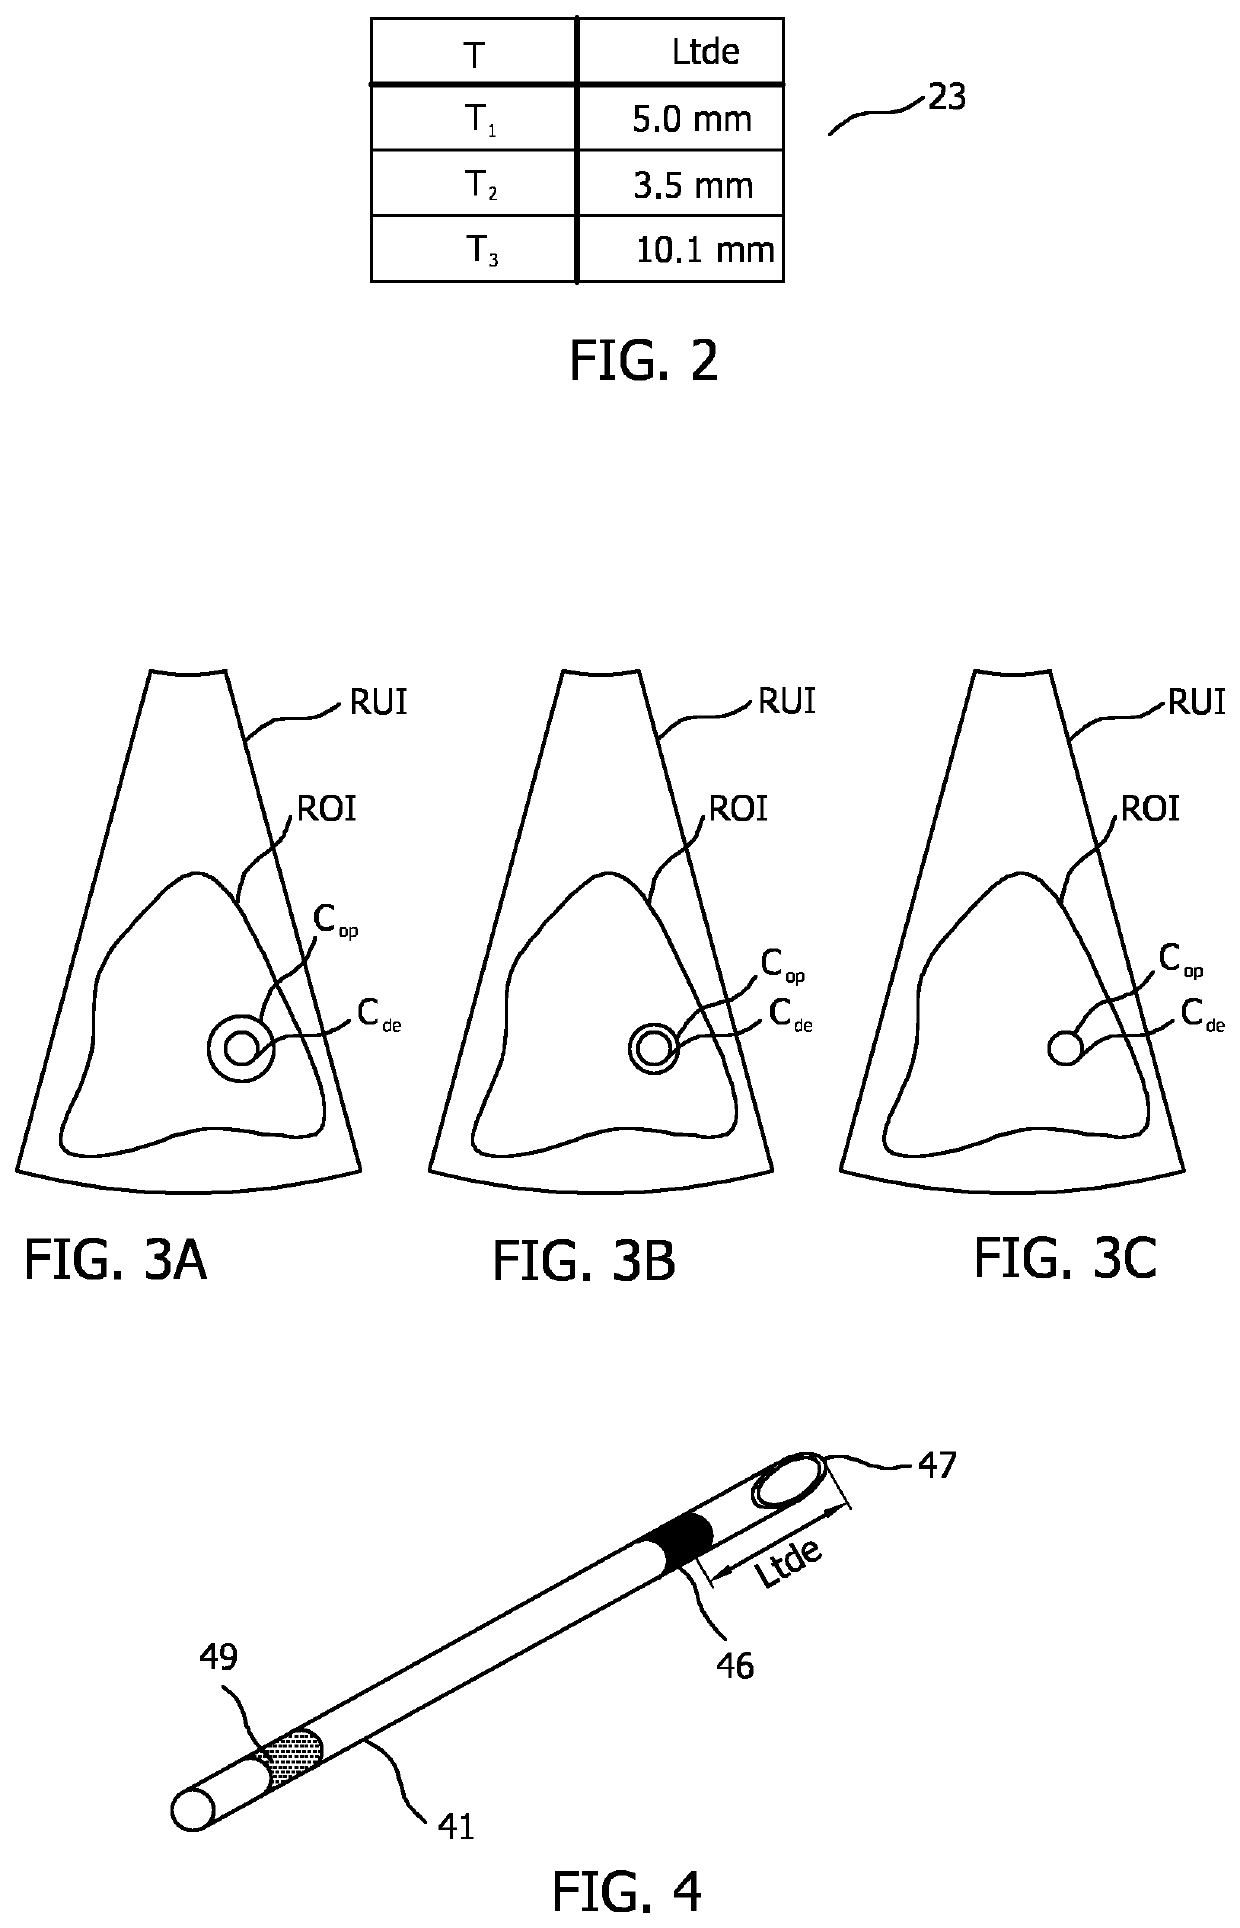 Interventional device recognition